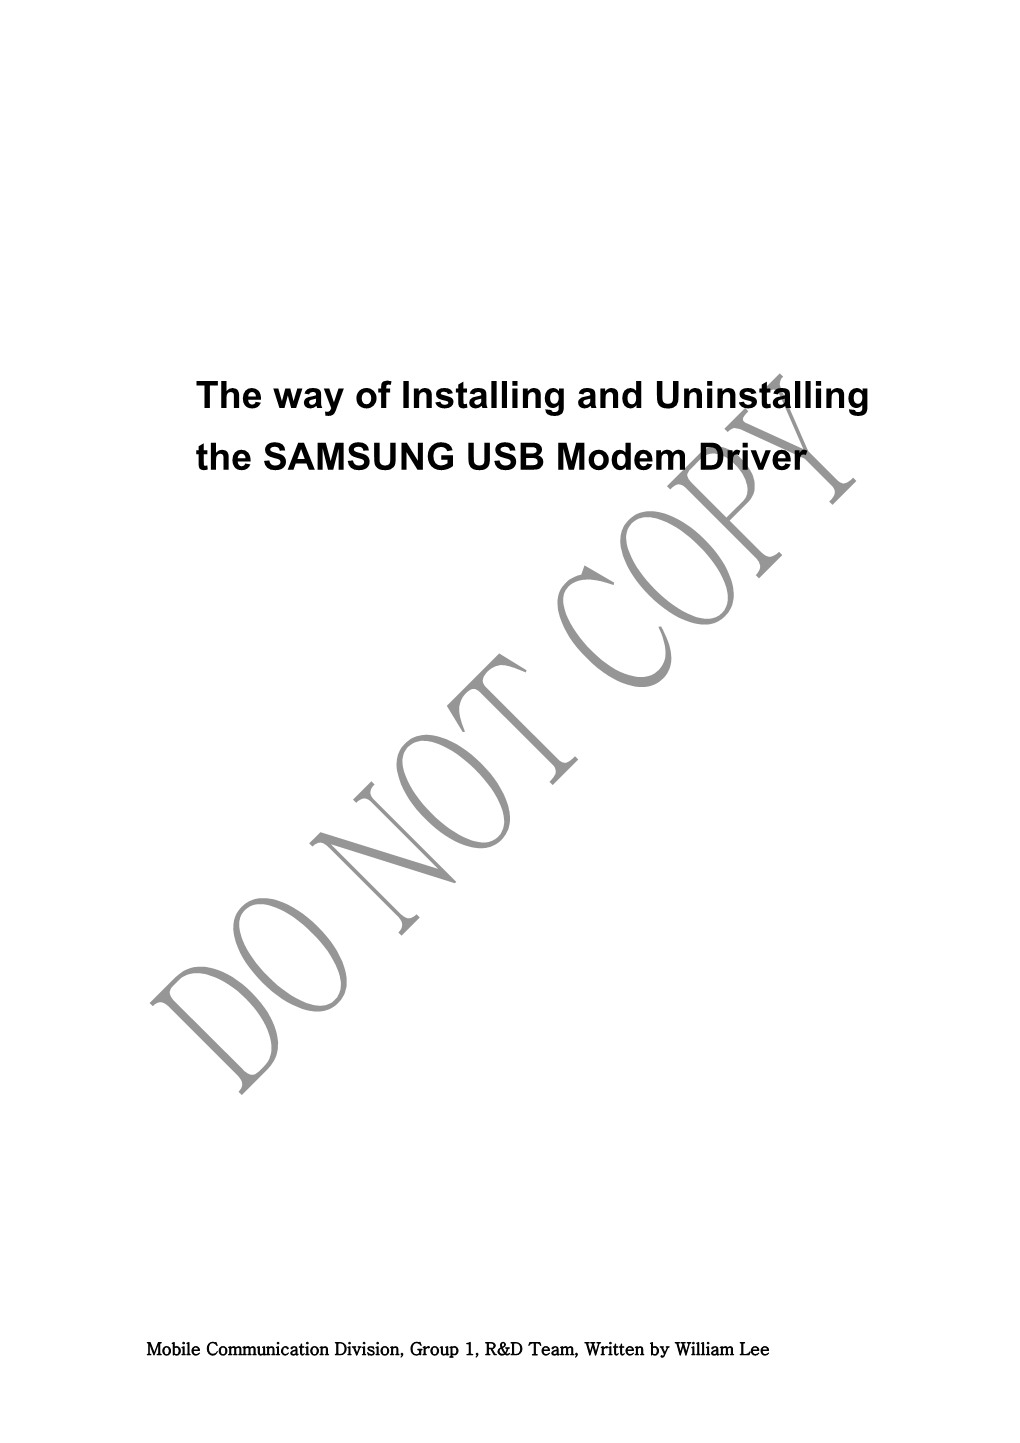 The Way of Installing and Uninstalling the SAMSUNG USB Modem Driver